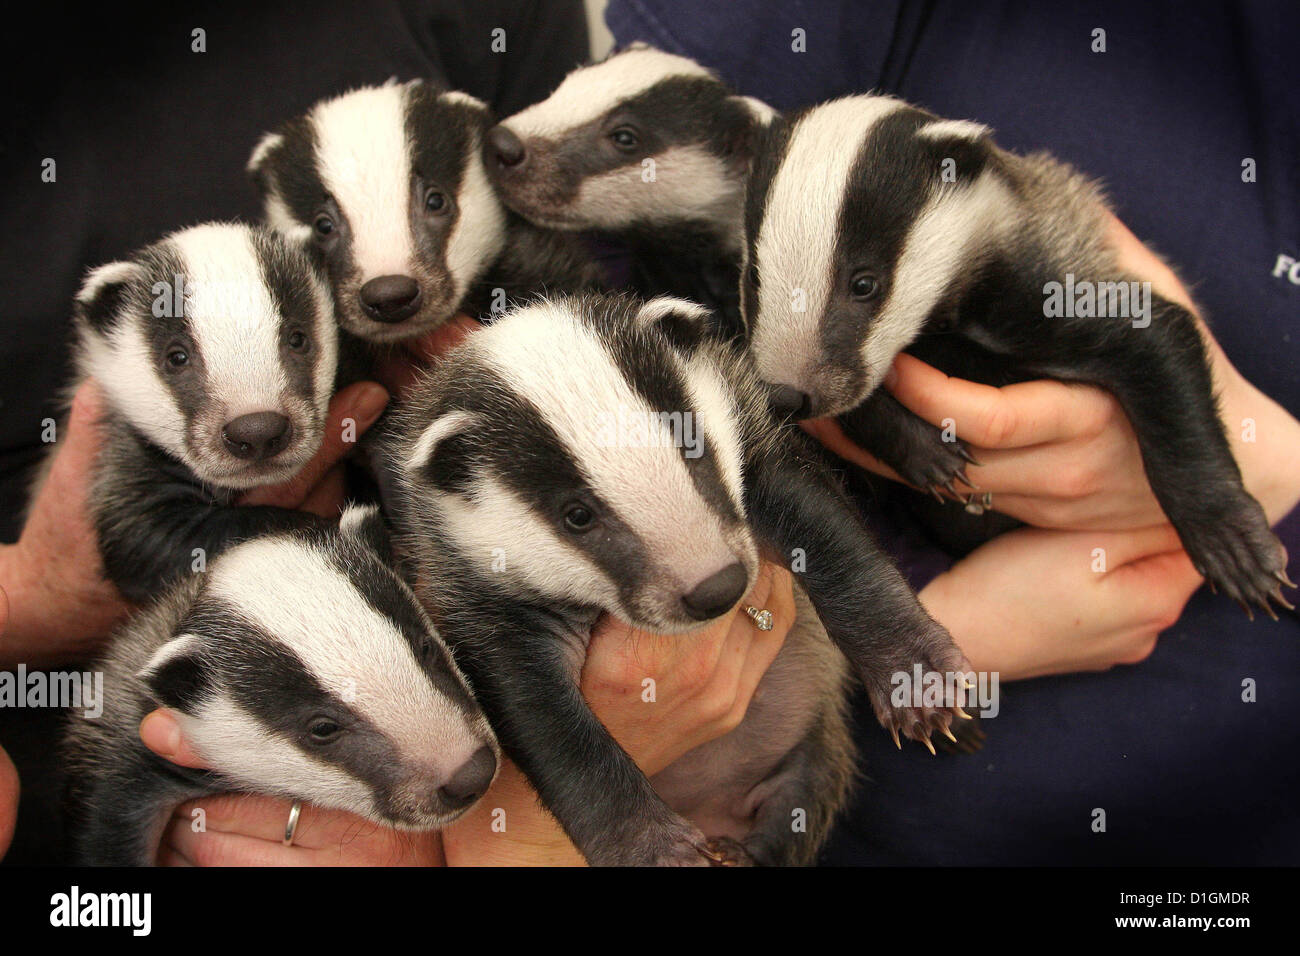 Rescued baby badger cubs Stock Photo